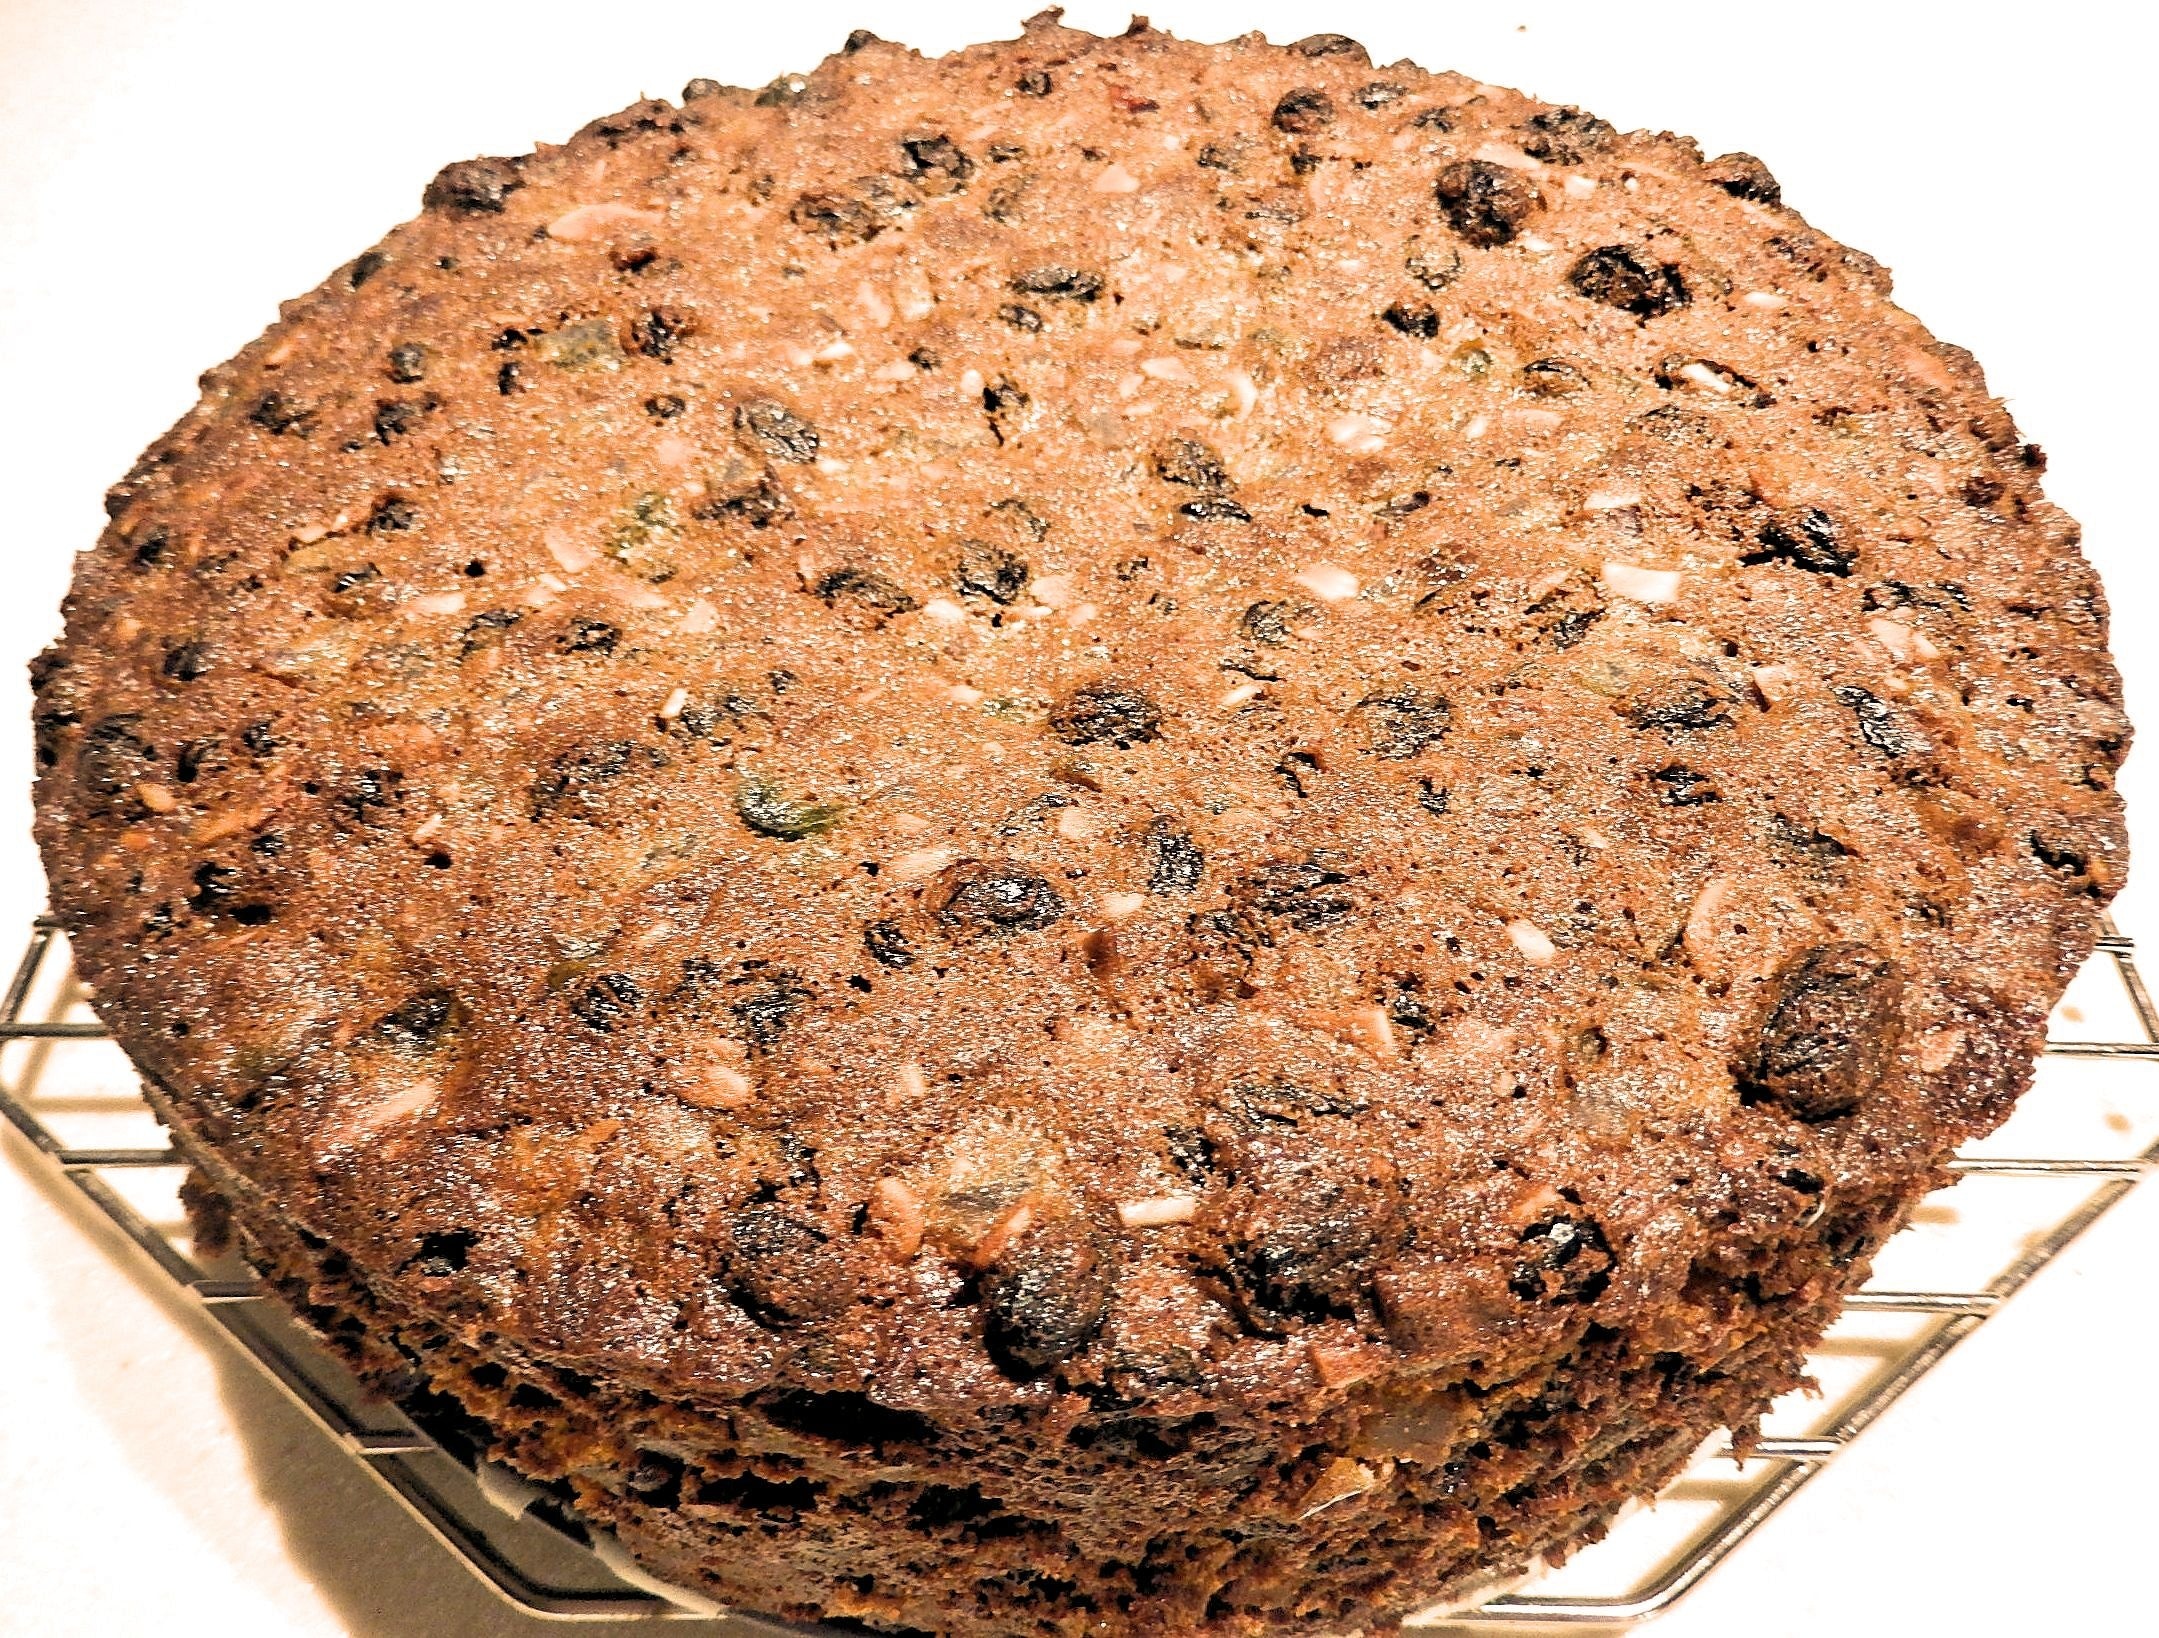 Raisins, Cherries, Fruit Cake, Almonds, baked, food and drink